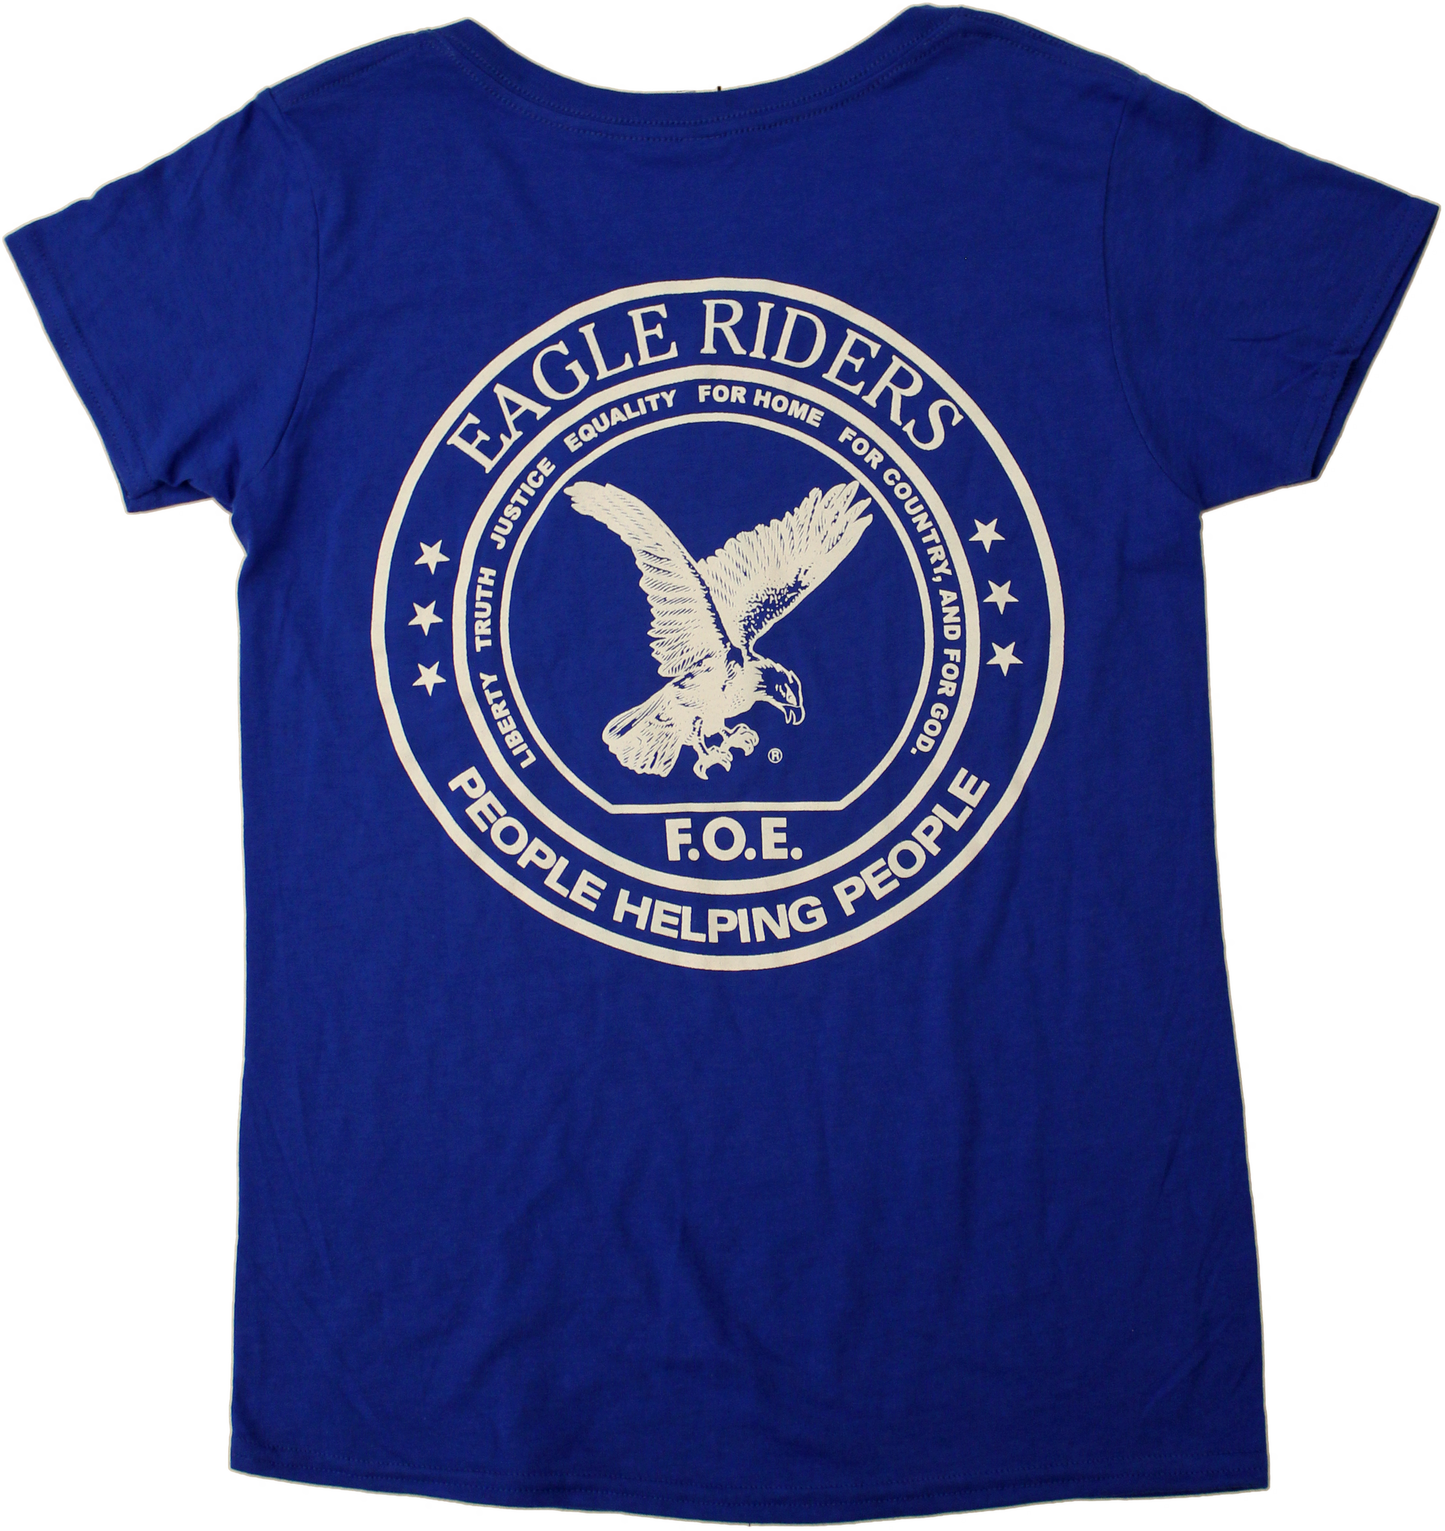 Ladies' Eagle Riders T-Shirt (Back Only)